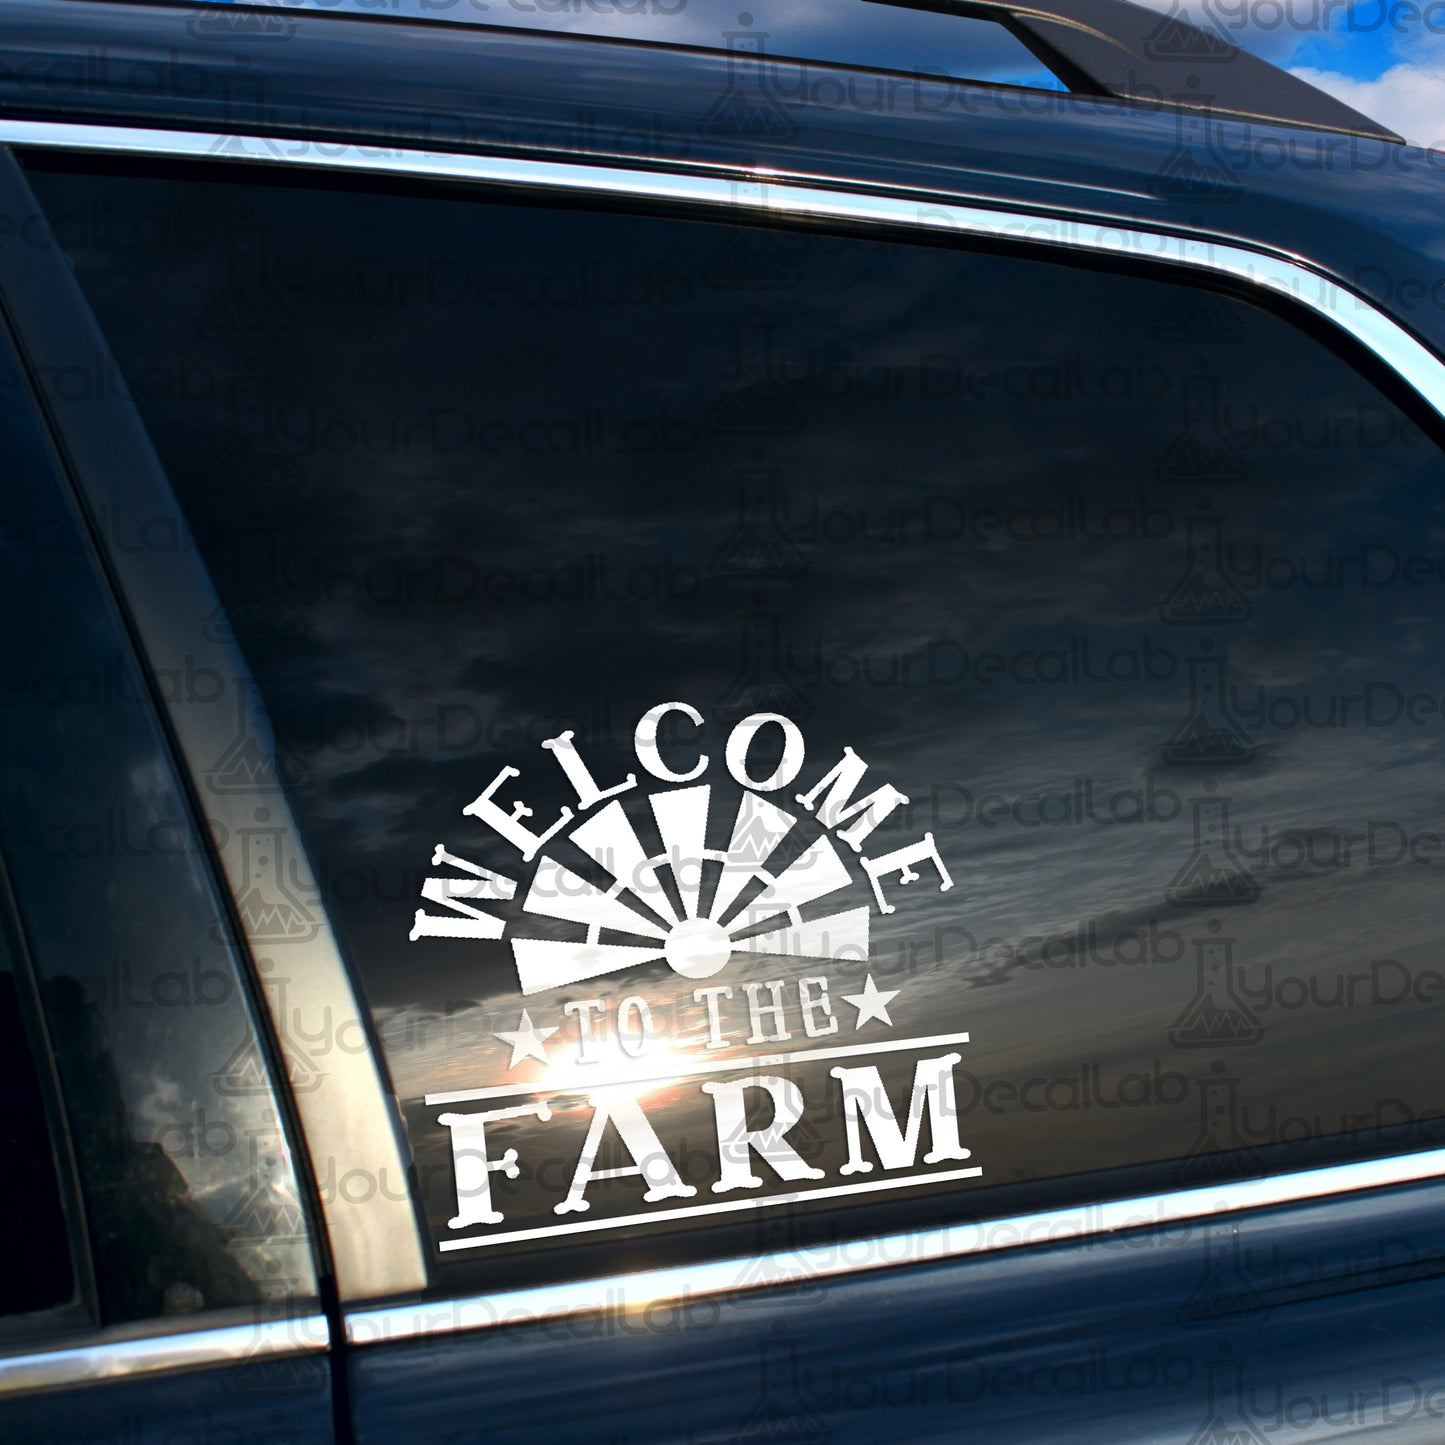 a welcome to the farm sticker on the side of a car